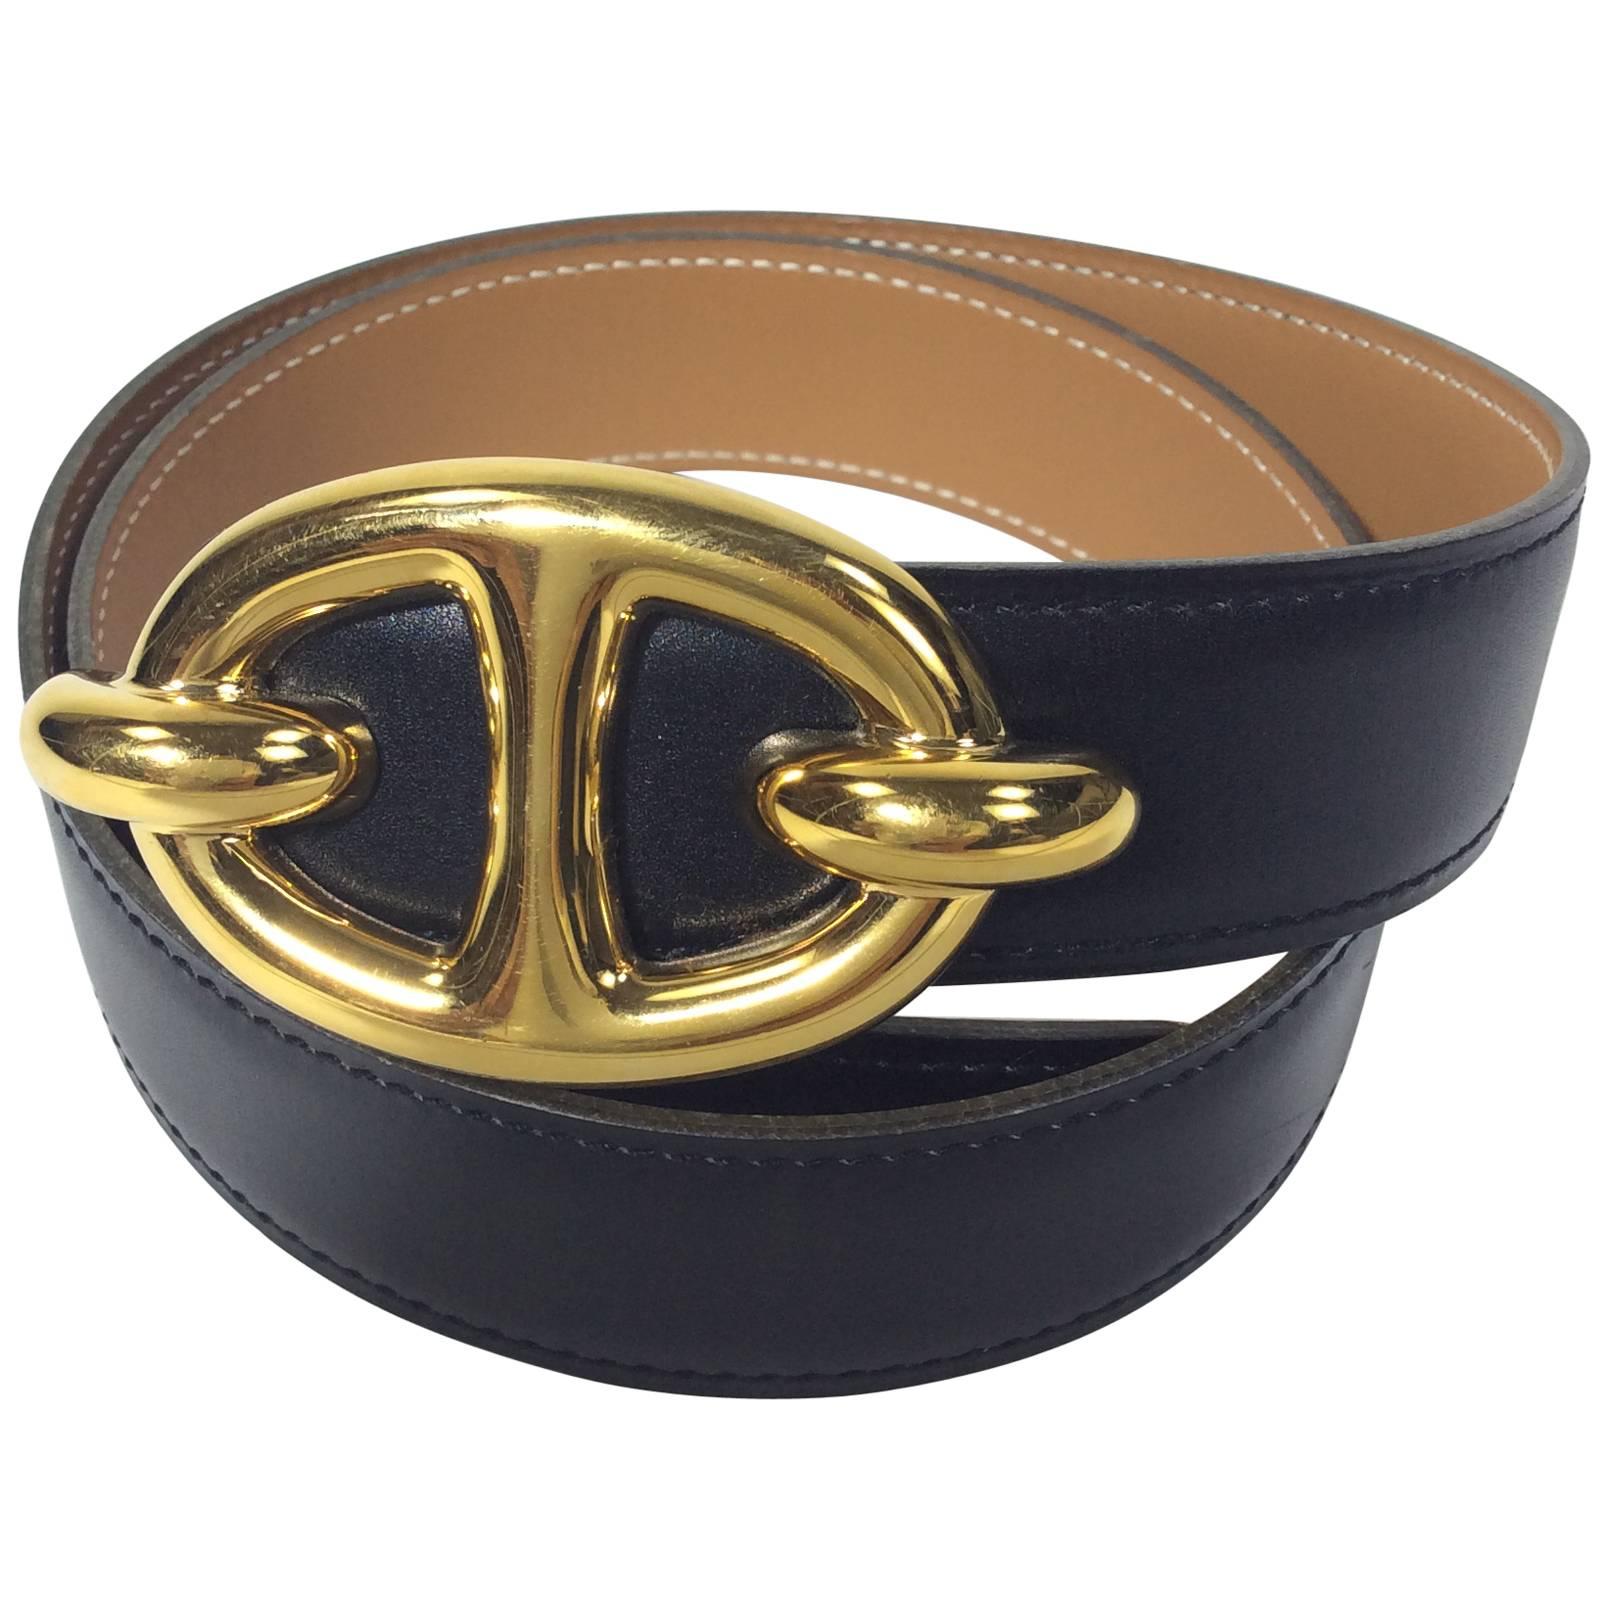 Hermes Black and Tan Reversible Belt with Gold Hardware For Sale